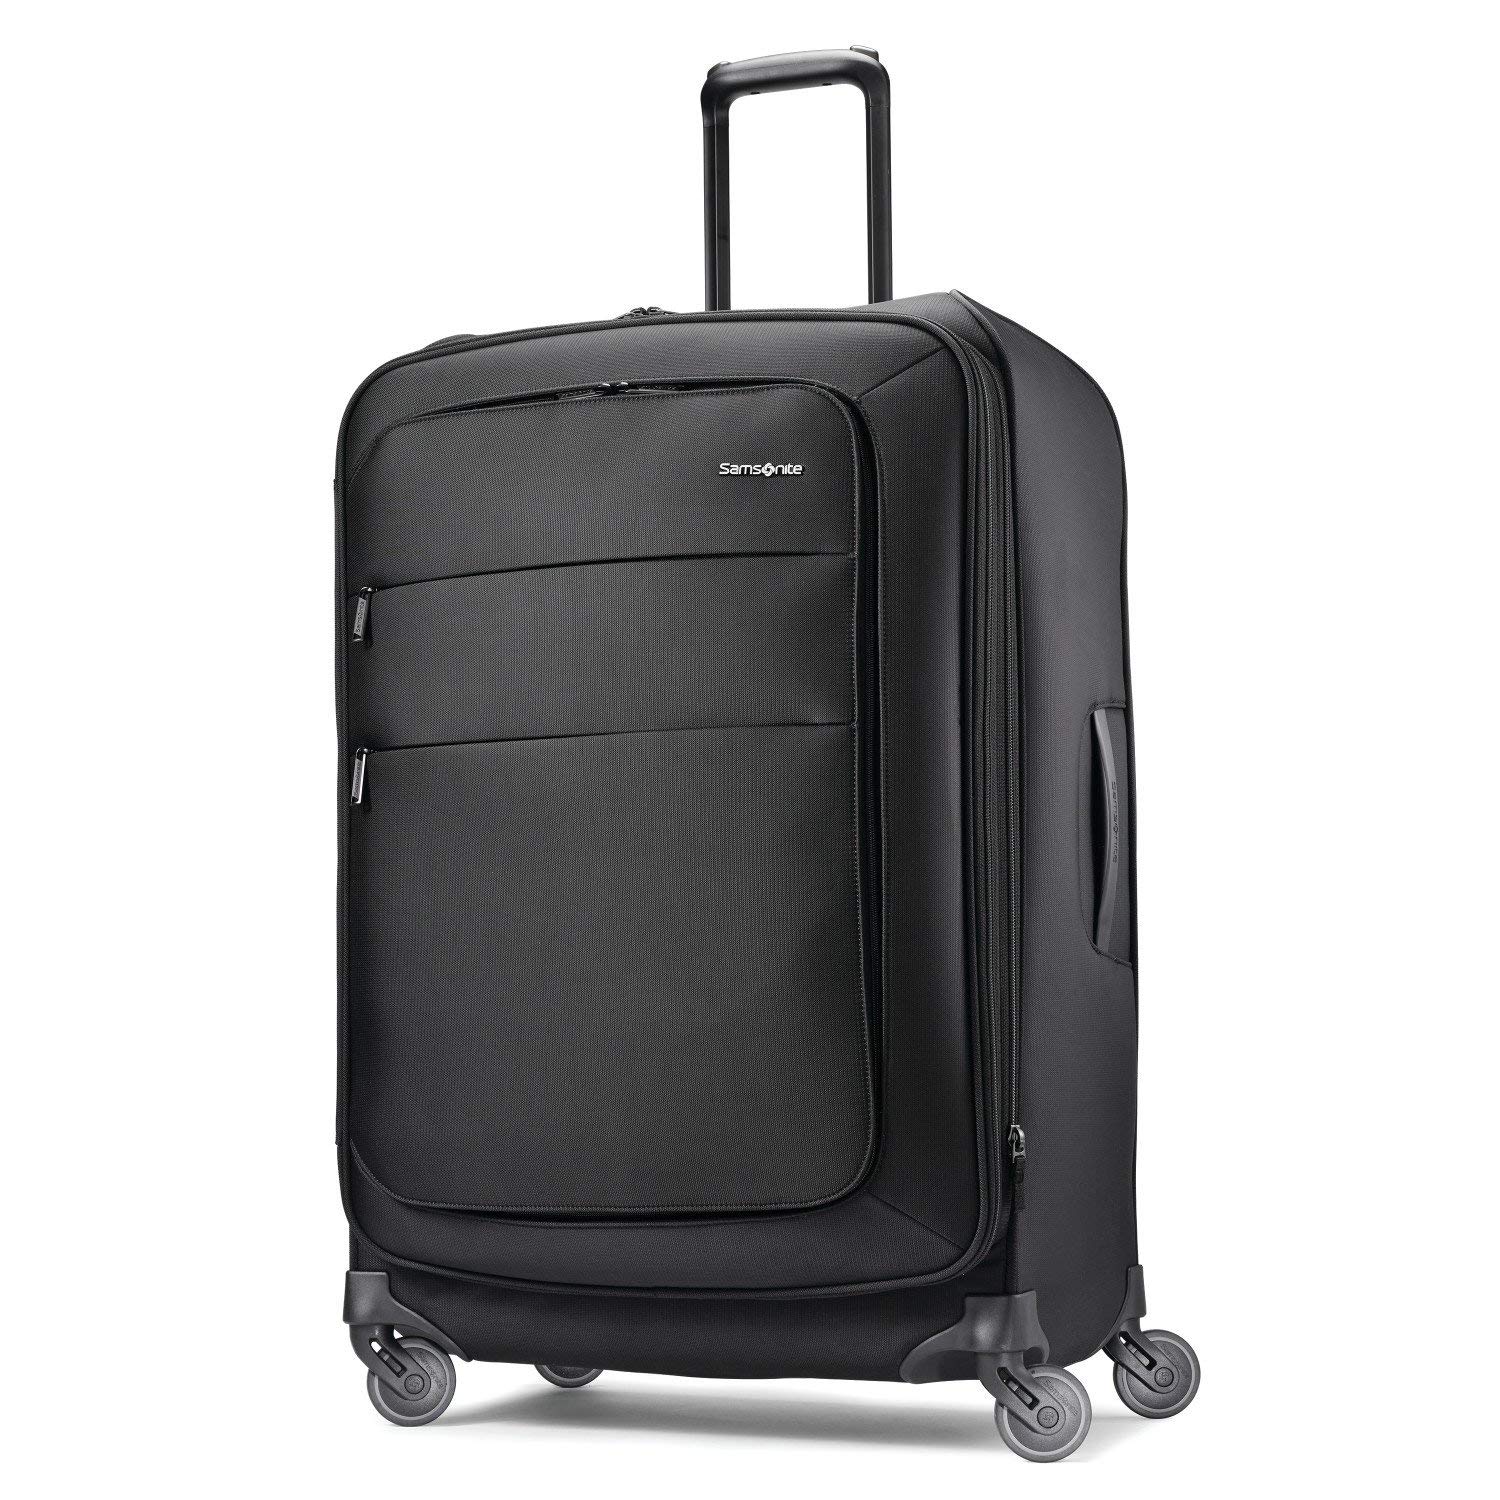 Samsonite Flexis Expandable Softside Checked Luggage with Spinner Wheels 30 Inch